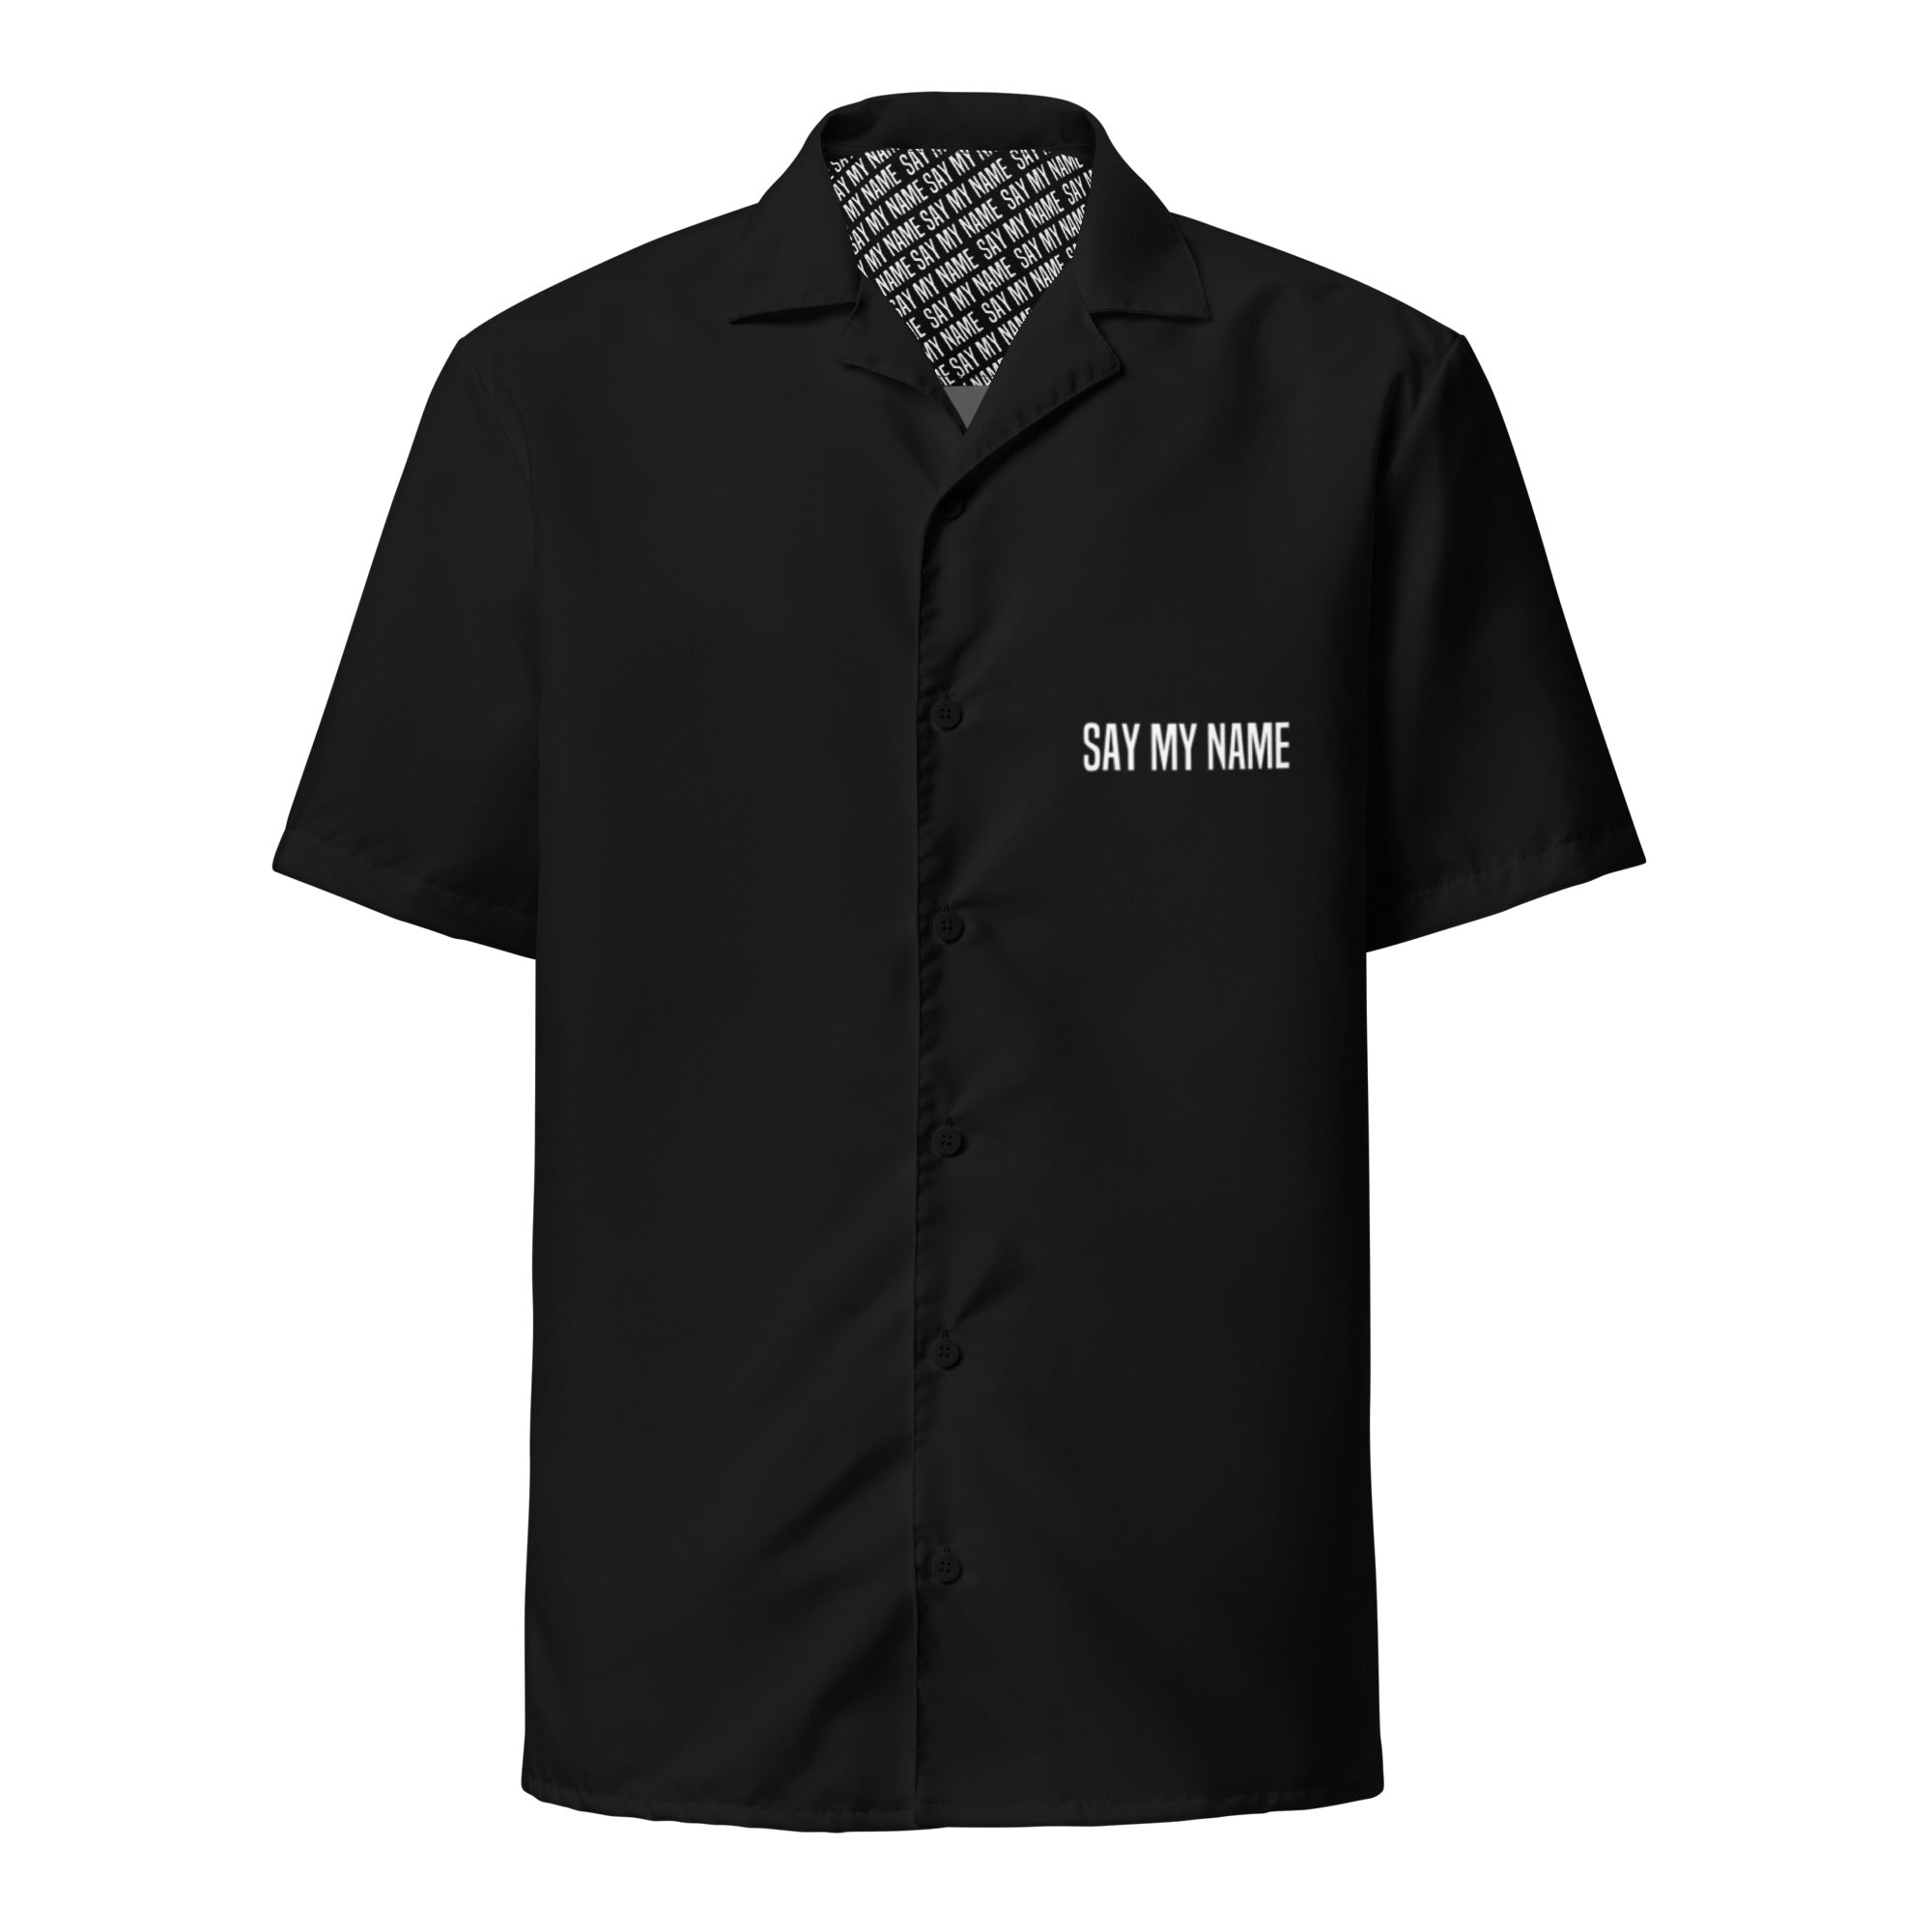 CSG unisex button-up shirt "SAY MY NAME"